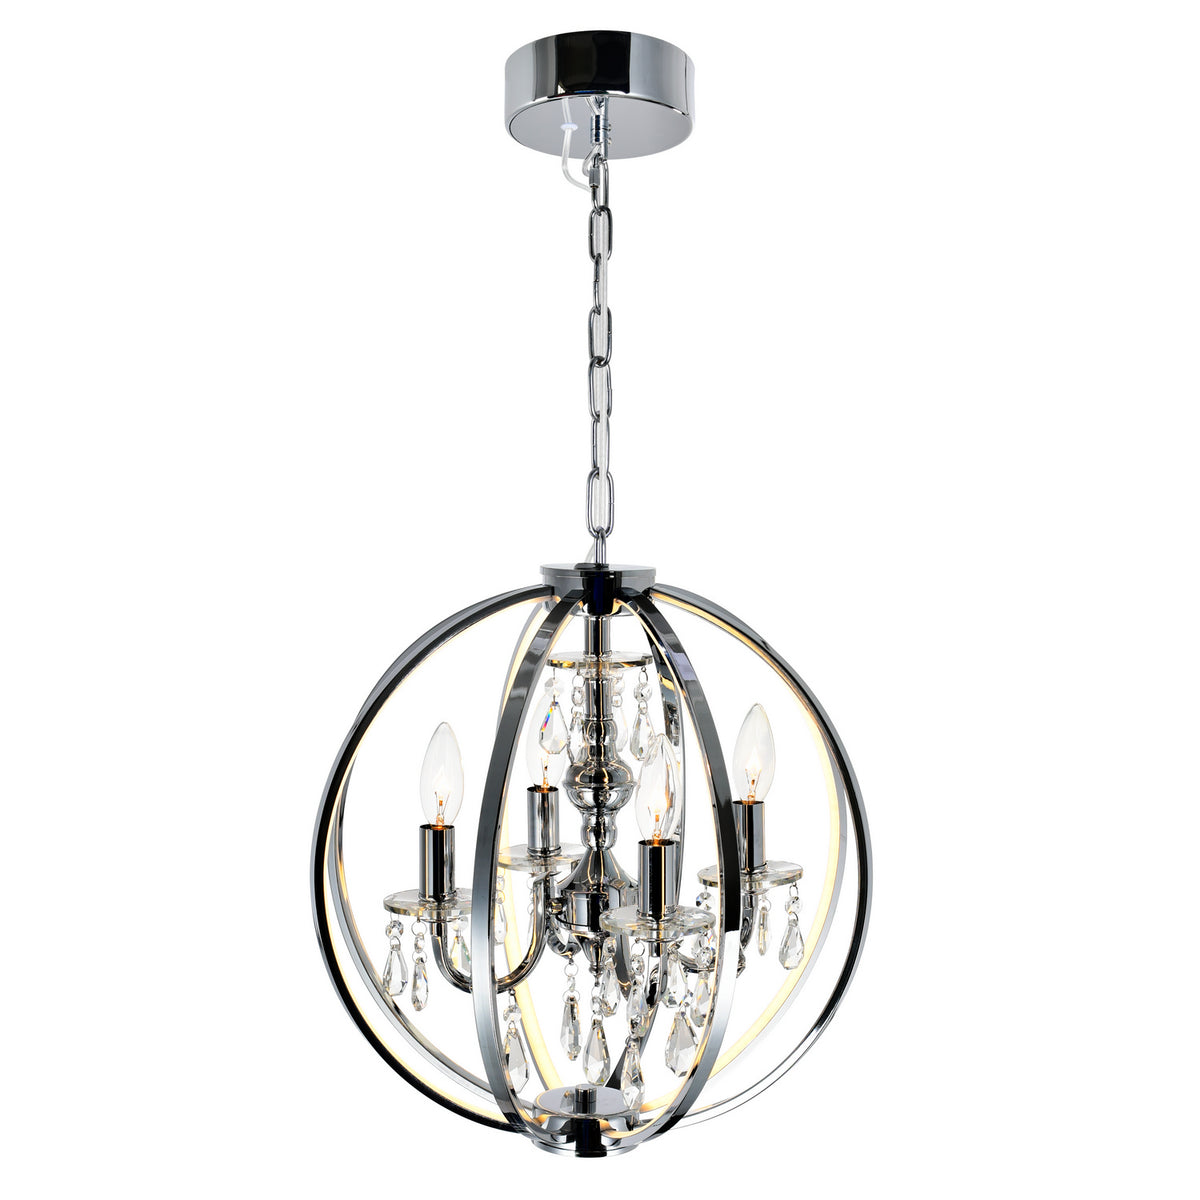 CWI Lighting Four Light Chandelier from the Abia collection in Chrome finish